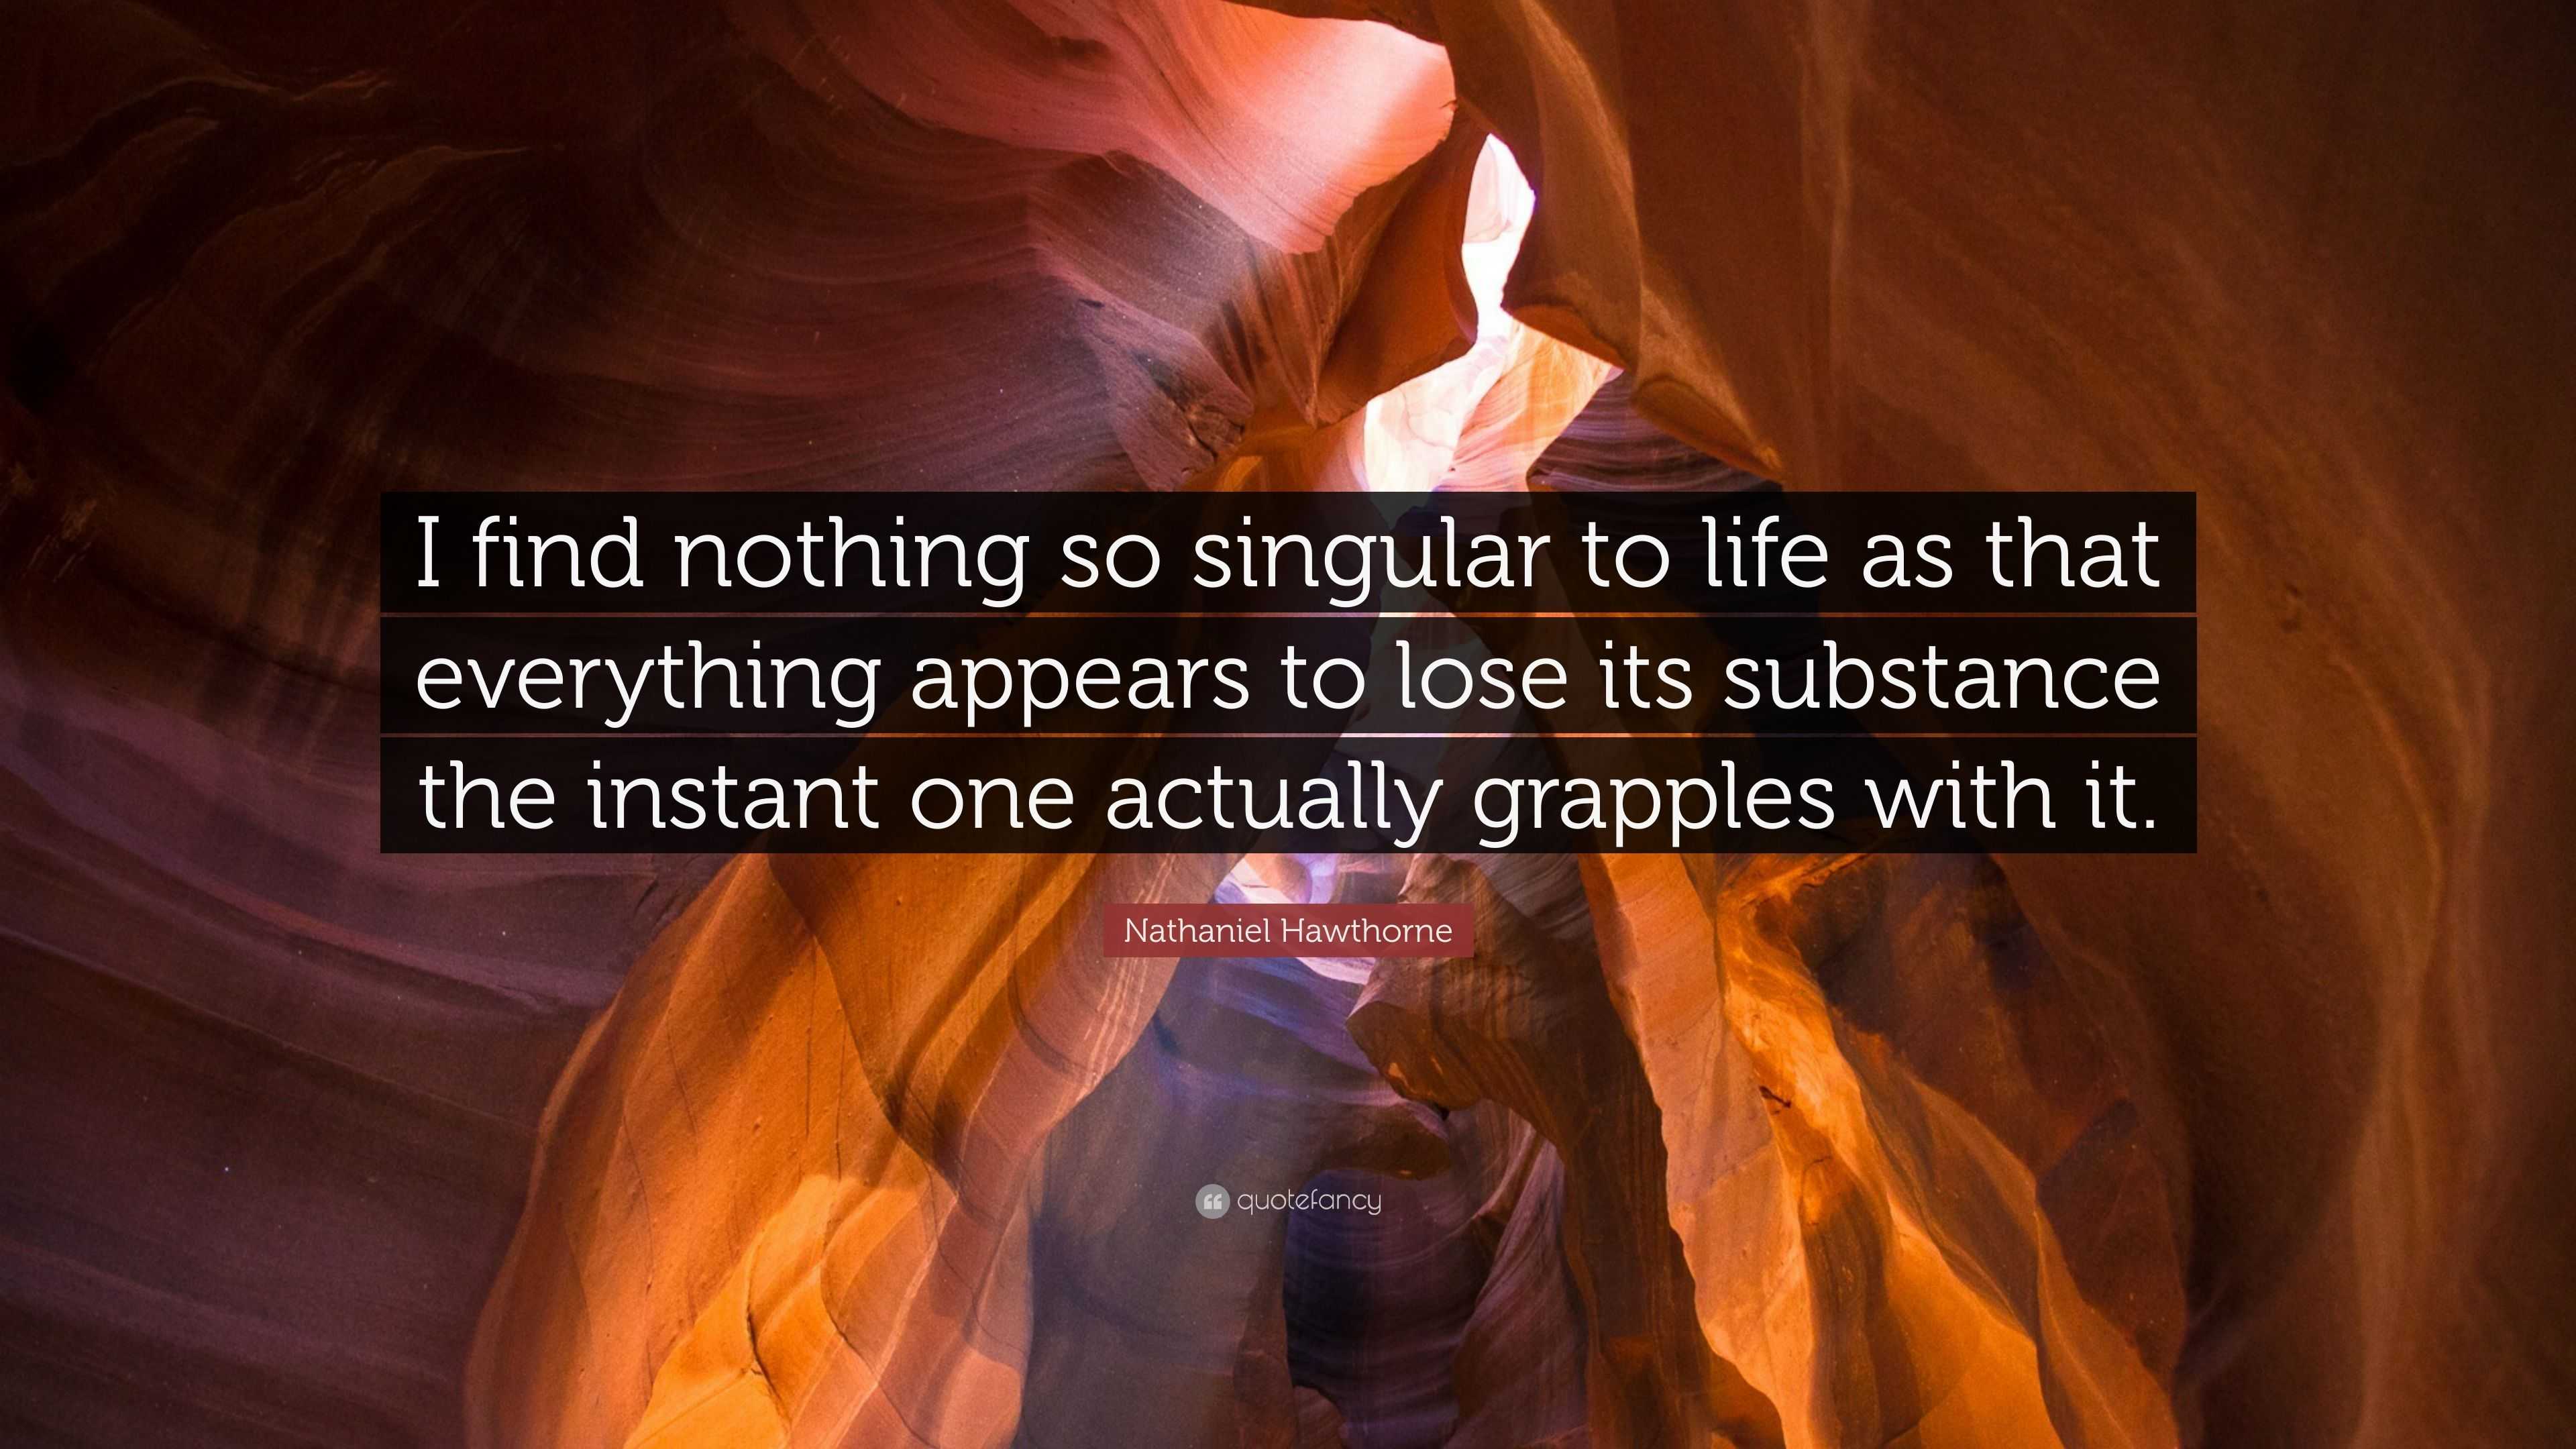 Nathaniel Hawthorne Quote: “I find nothing so singular to life as that  everything appears to lose its substance the instant one actually grapples  wi”